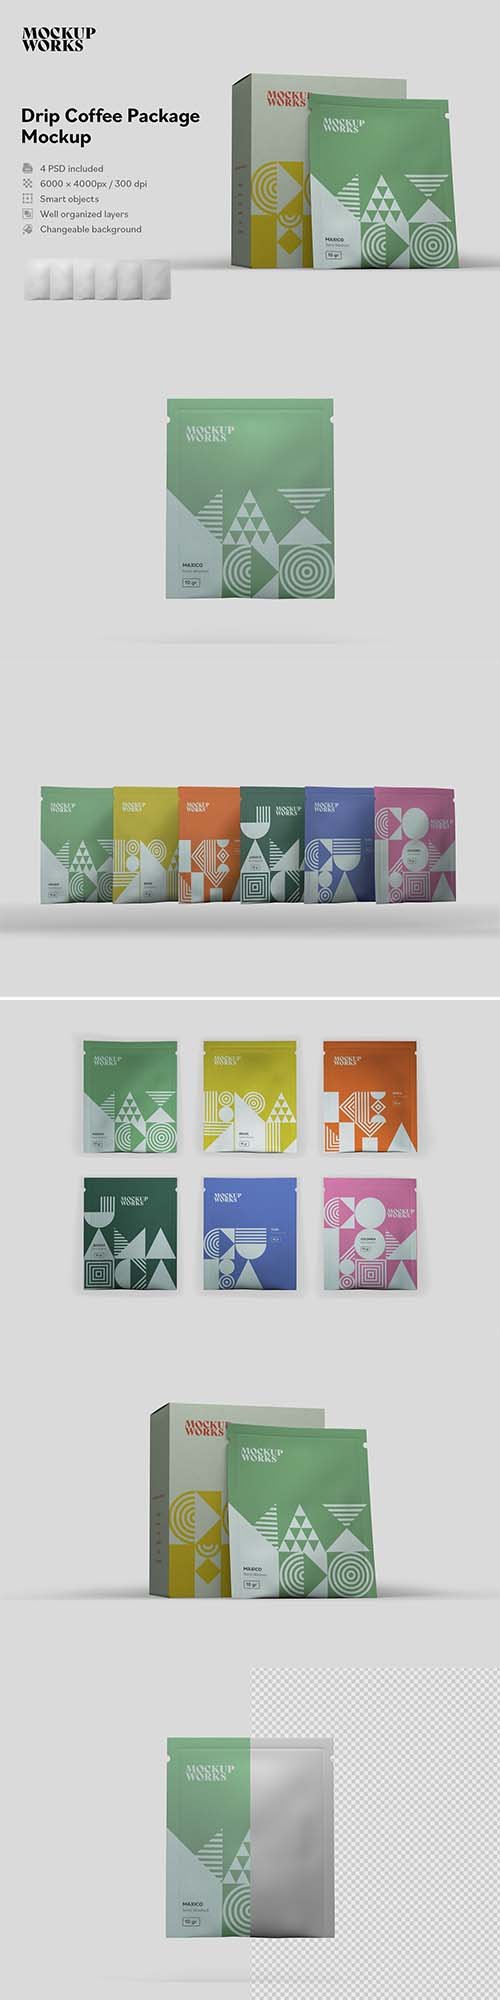 Download CreativeMarket - Drip Coffee Package Mockup 5877145 » NitroGFX - Download Unique Graphics For ...